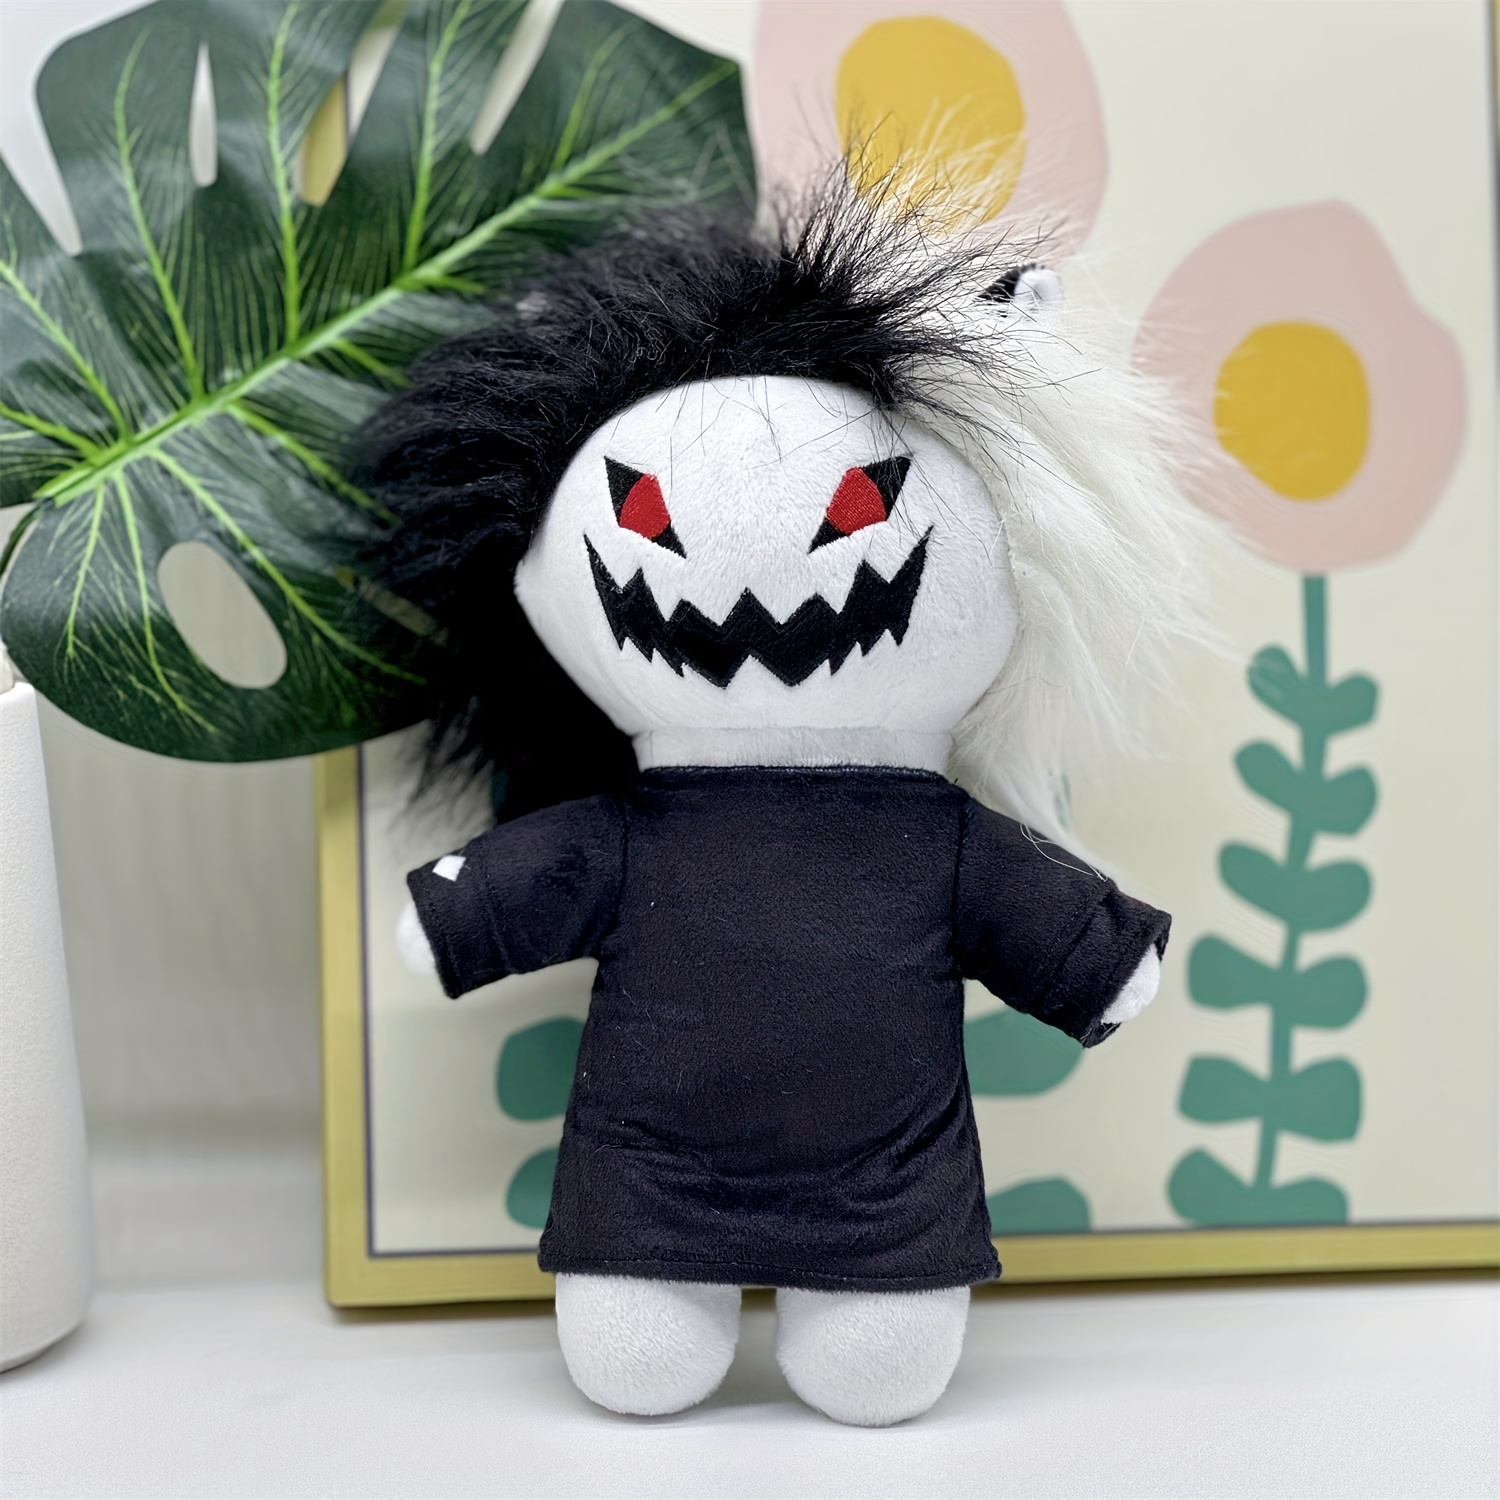 High-quality Plush Doll Gift - Healing And Redemption Game